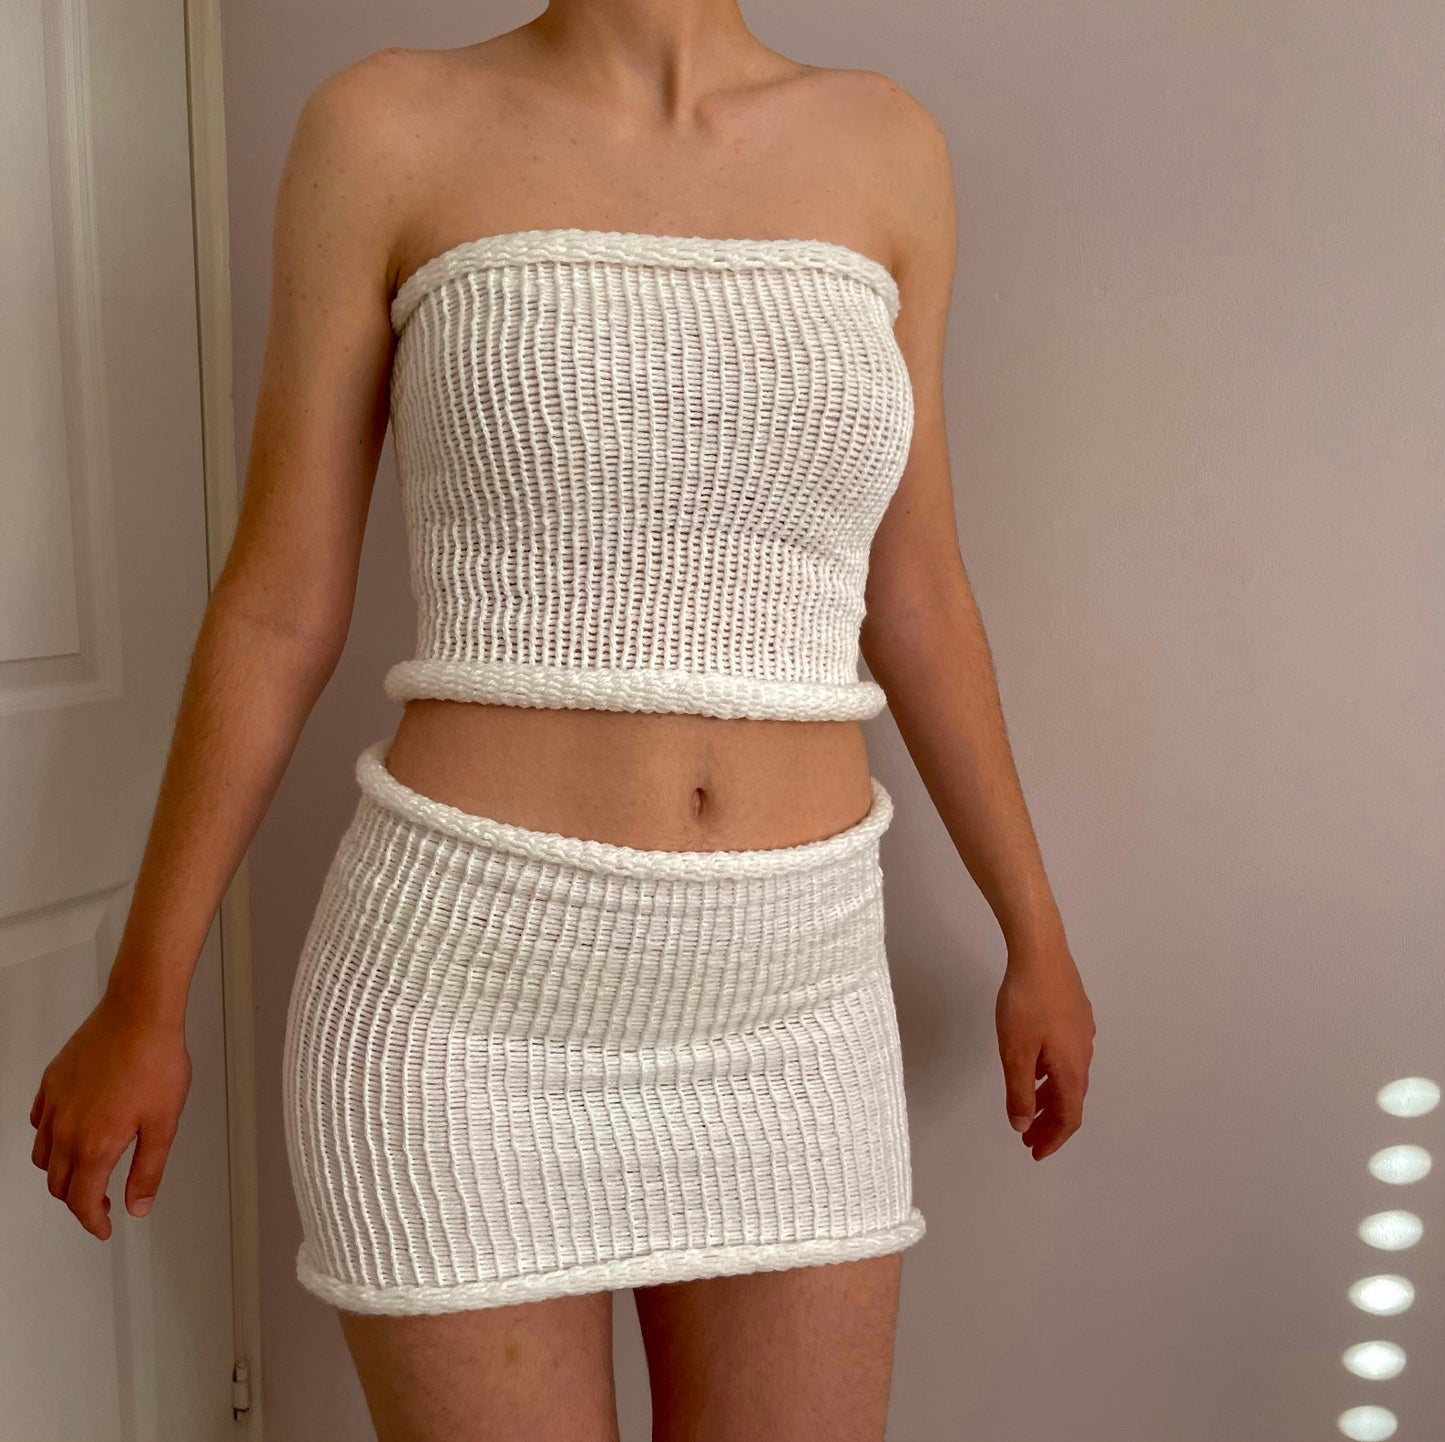 SET: Handmade knitted bandeau top and skirt in white